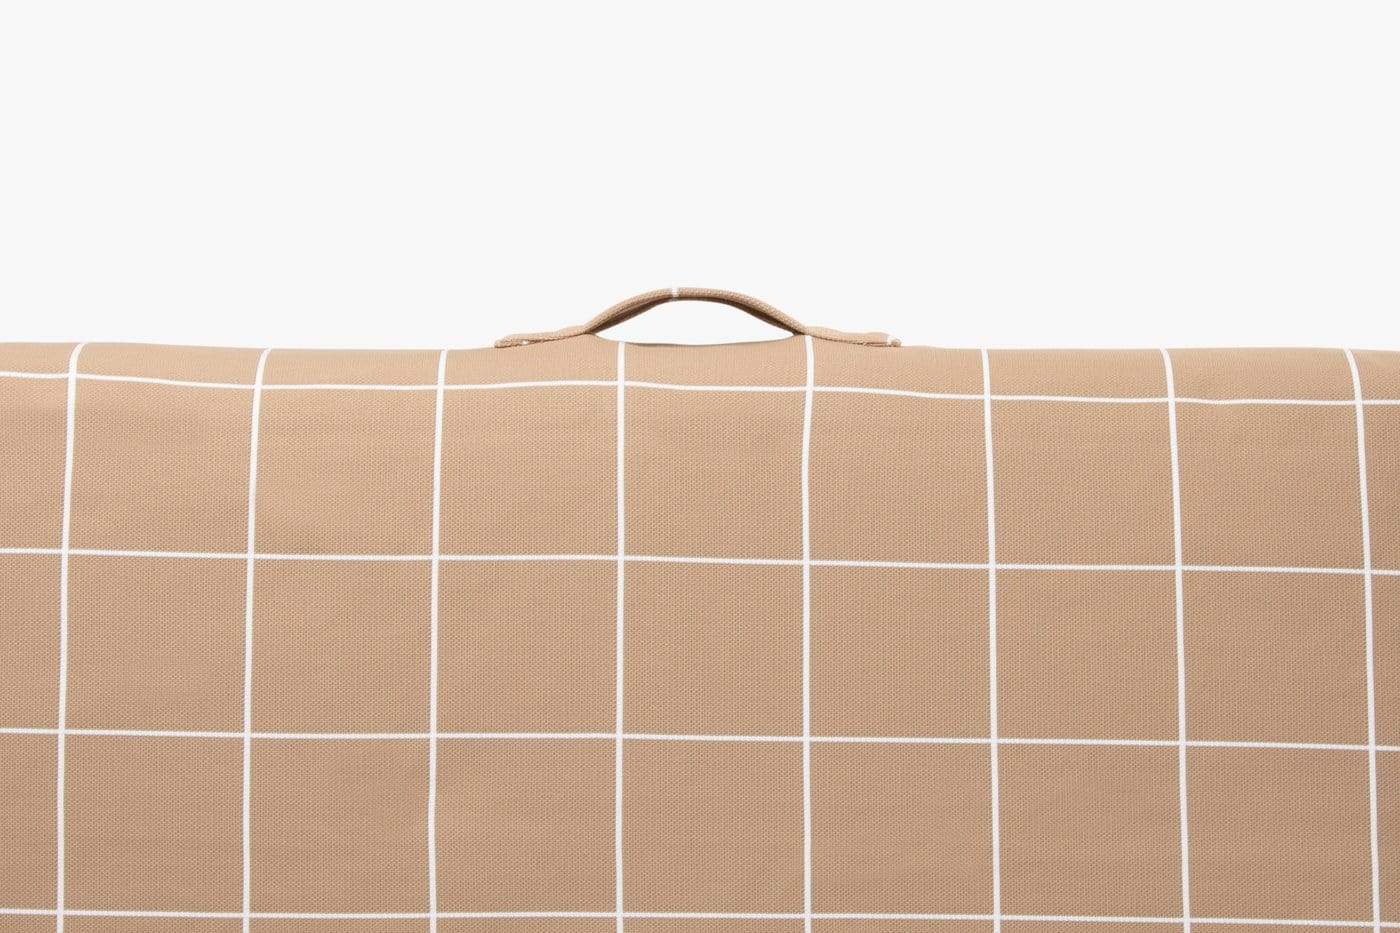 Laylo Pets Grid LAY LO Pets - Tan Grid Dog Bed or Bed Cover Lay Lo Pets